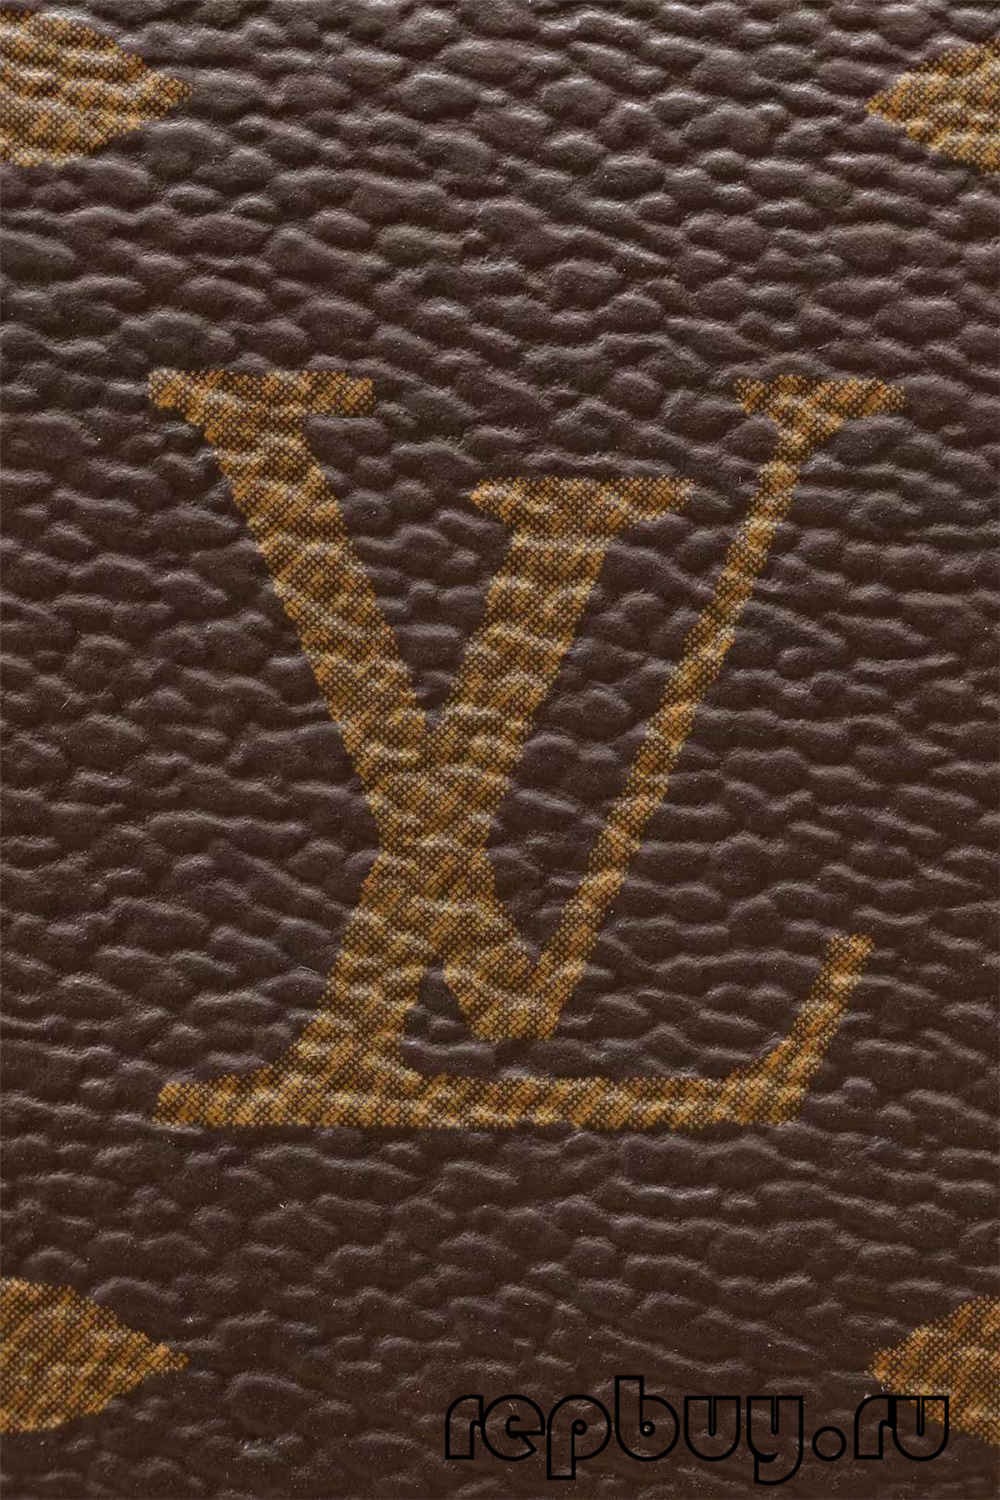 Best quality Louis Vuitton Speedy 25 bag replica online shopping （2022 updated）-Best Quality Fake Louis Vuitton Bag Online Store, Replica designer bag ru